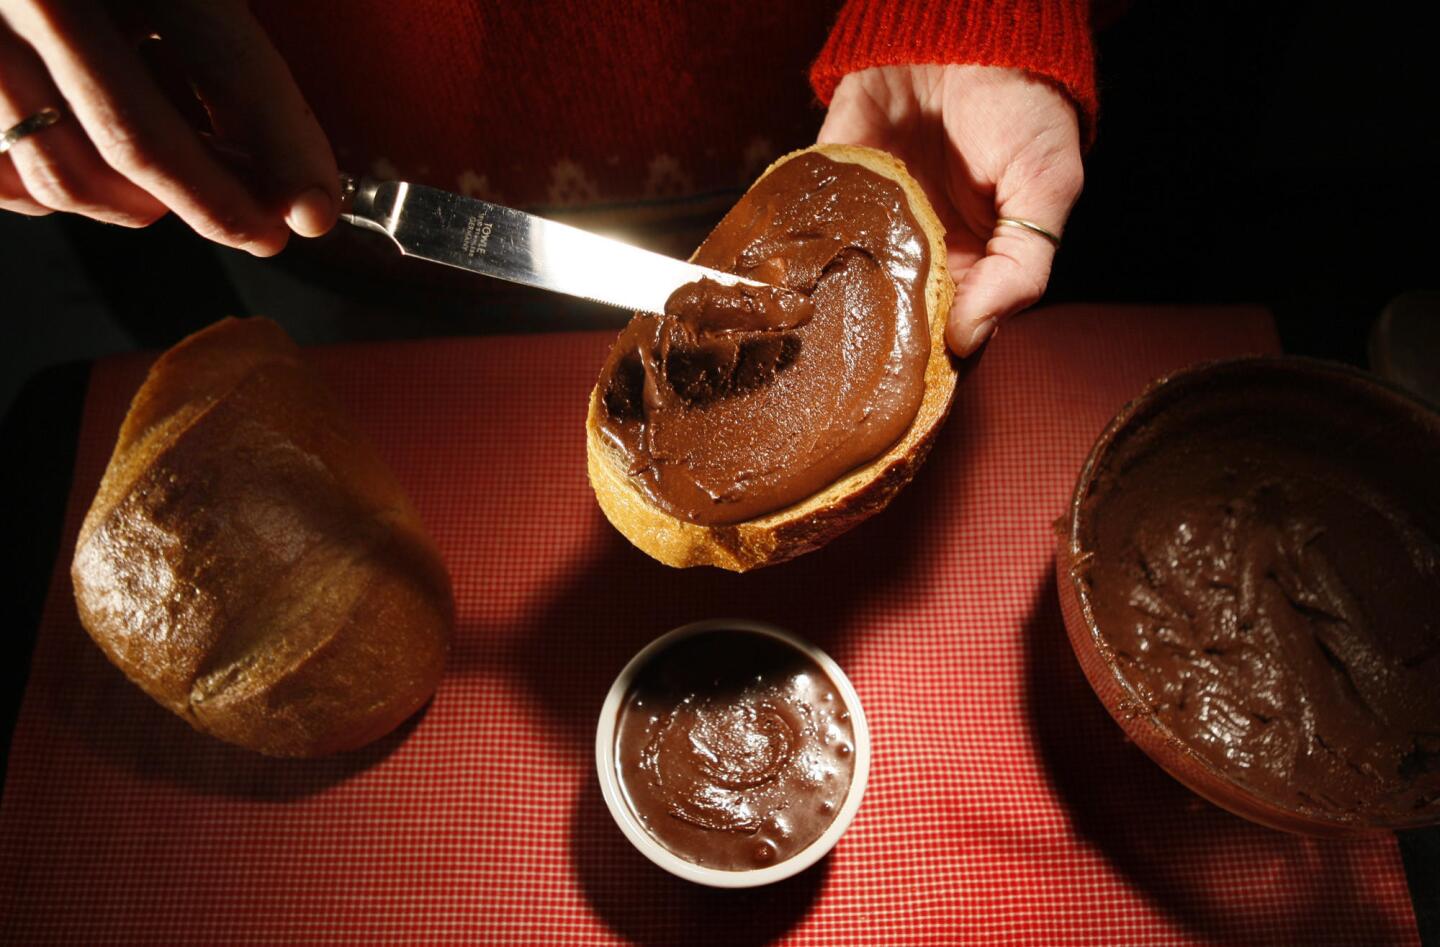 Keep it simple. Slice up some quality bread and slather liberally with easy-to-make hazelnut chocolate spread. Recipe: homemade Nutella.